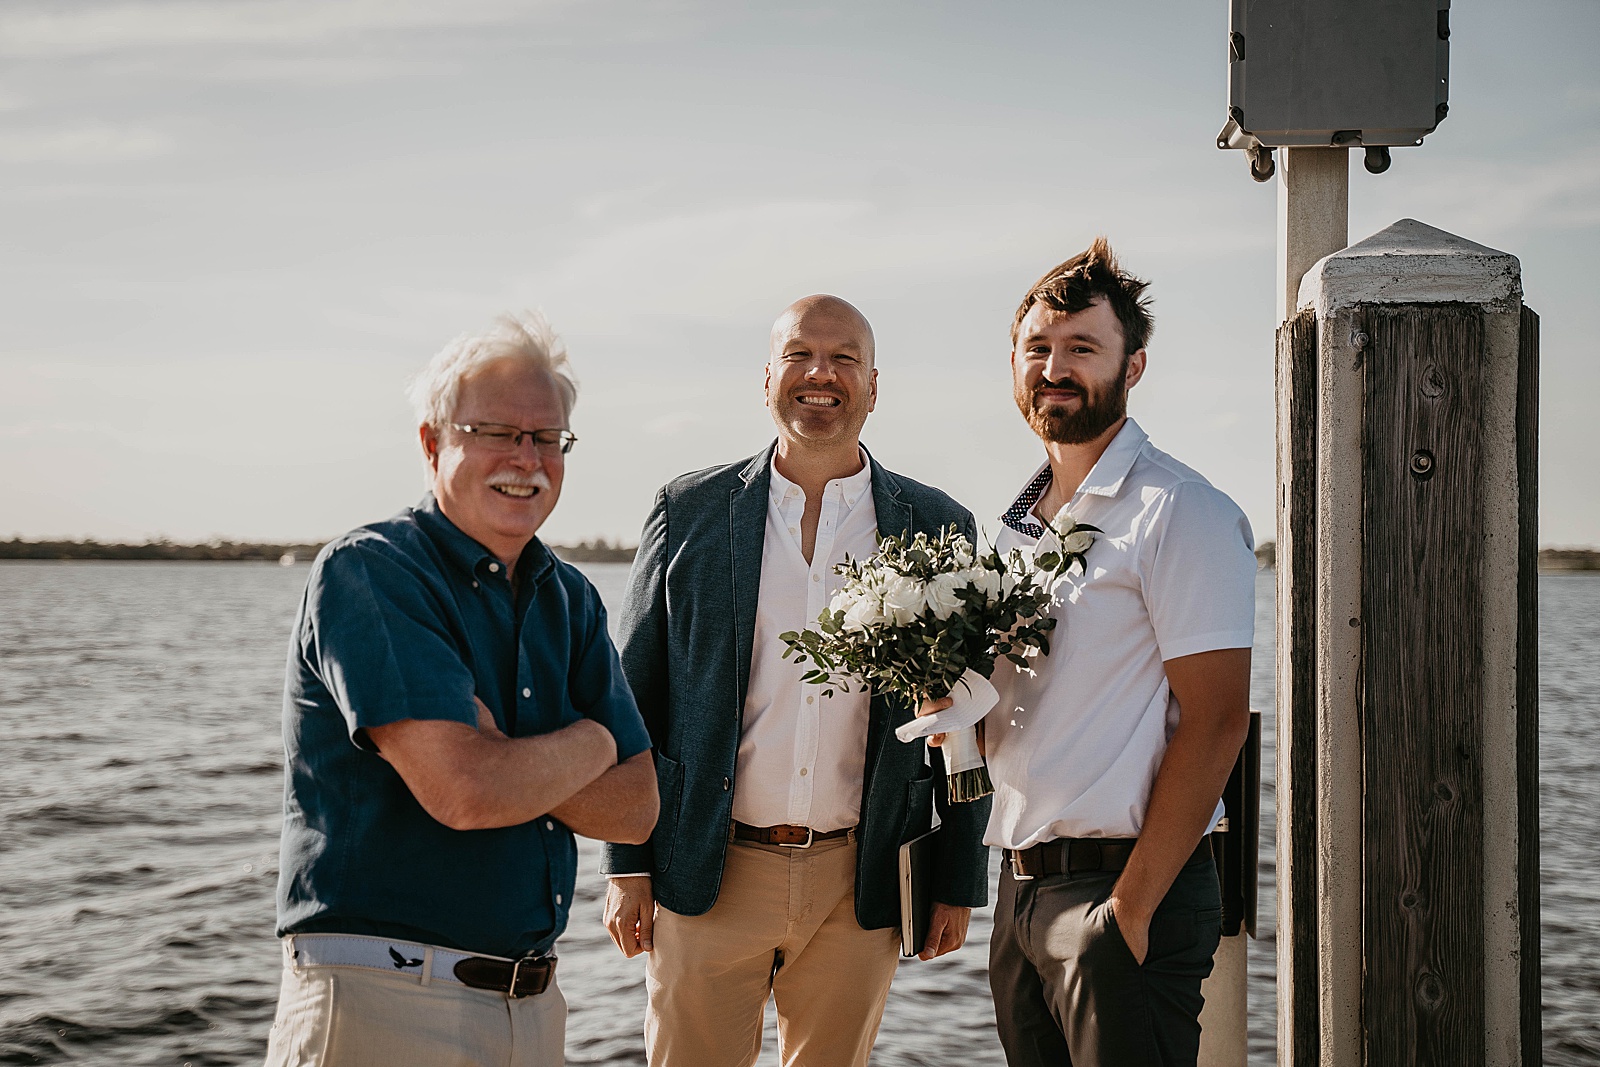 South Florida Waterfront Elopement captured by South Florida Elopement Photographer, Krystal Capone Photography